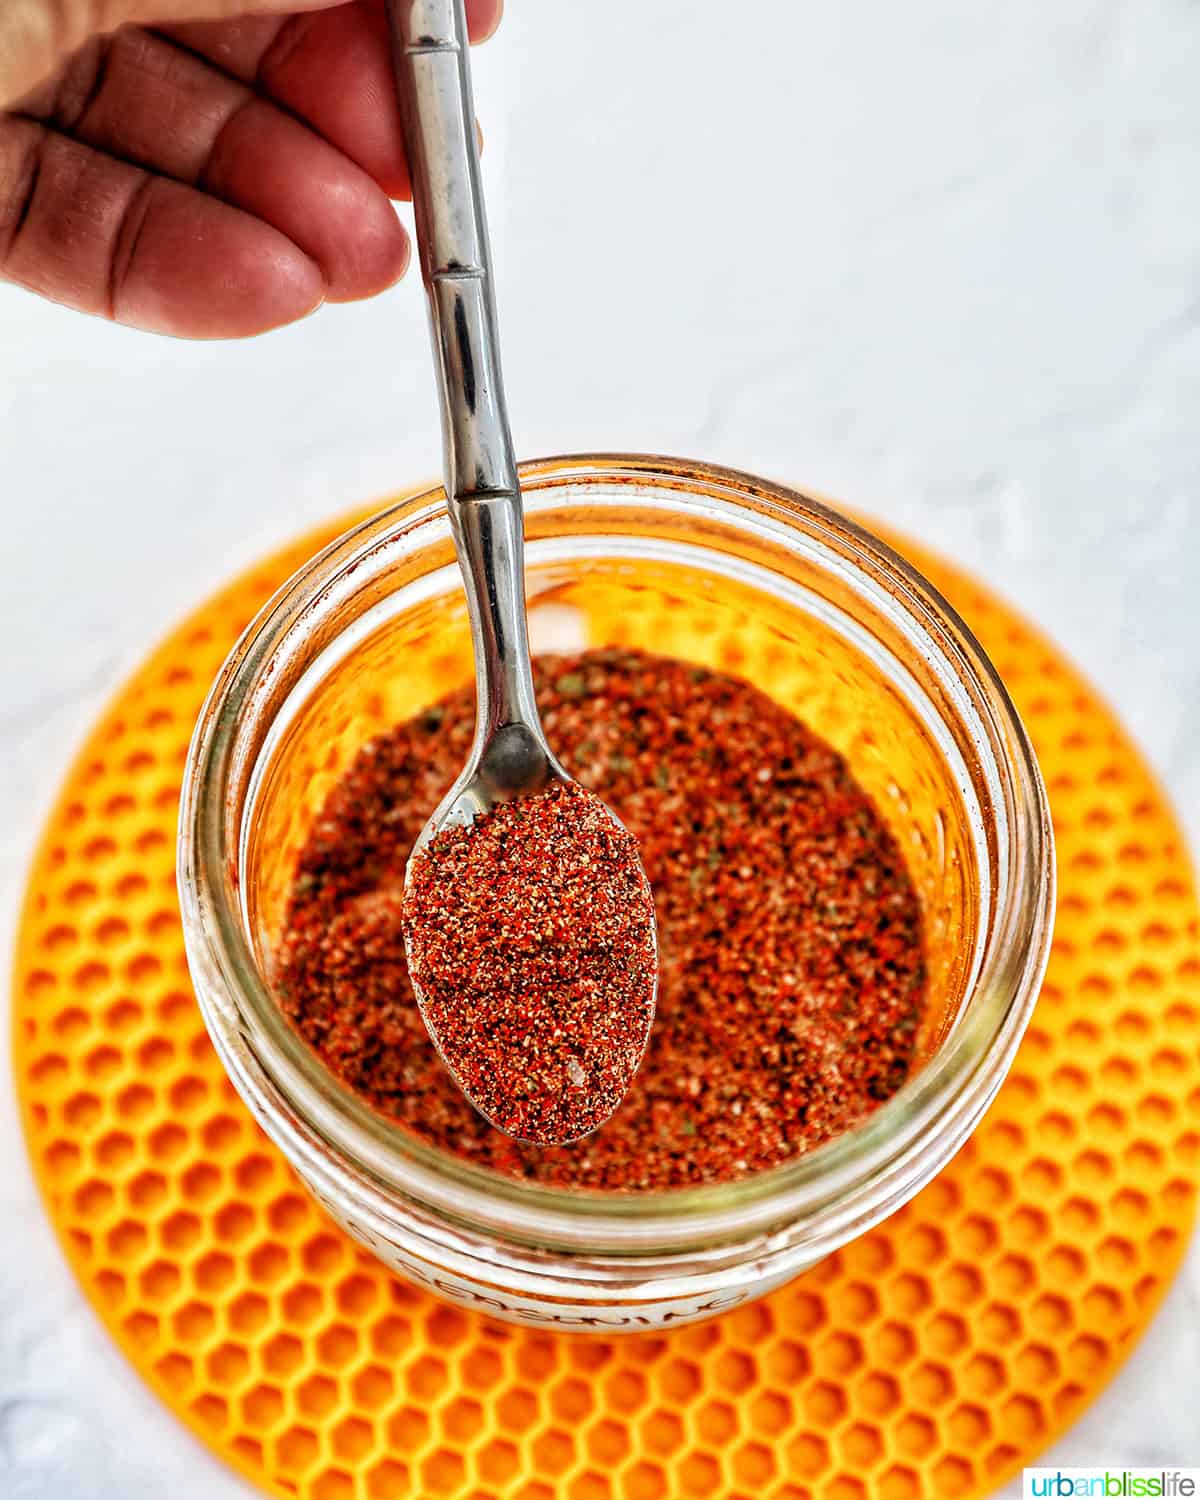 hand holding a spoon in a jar of homemade taco seasoning on a yellow mat.